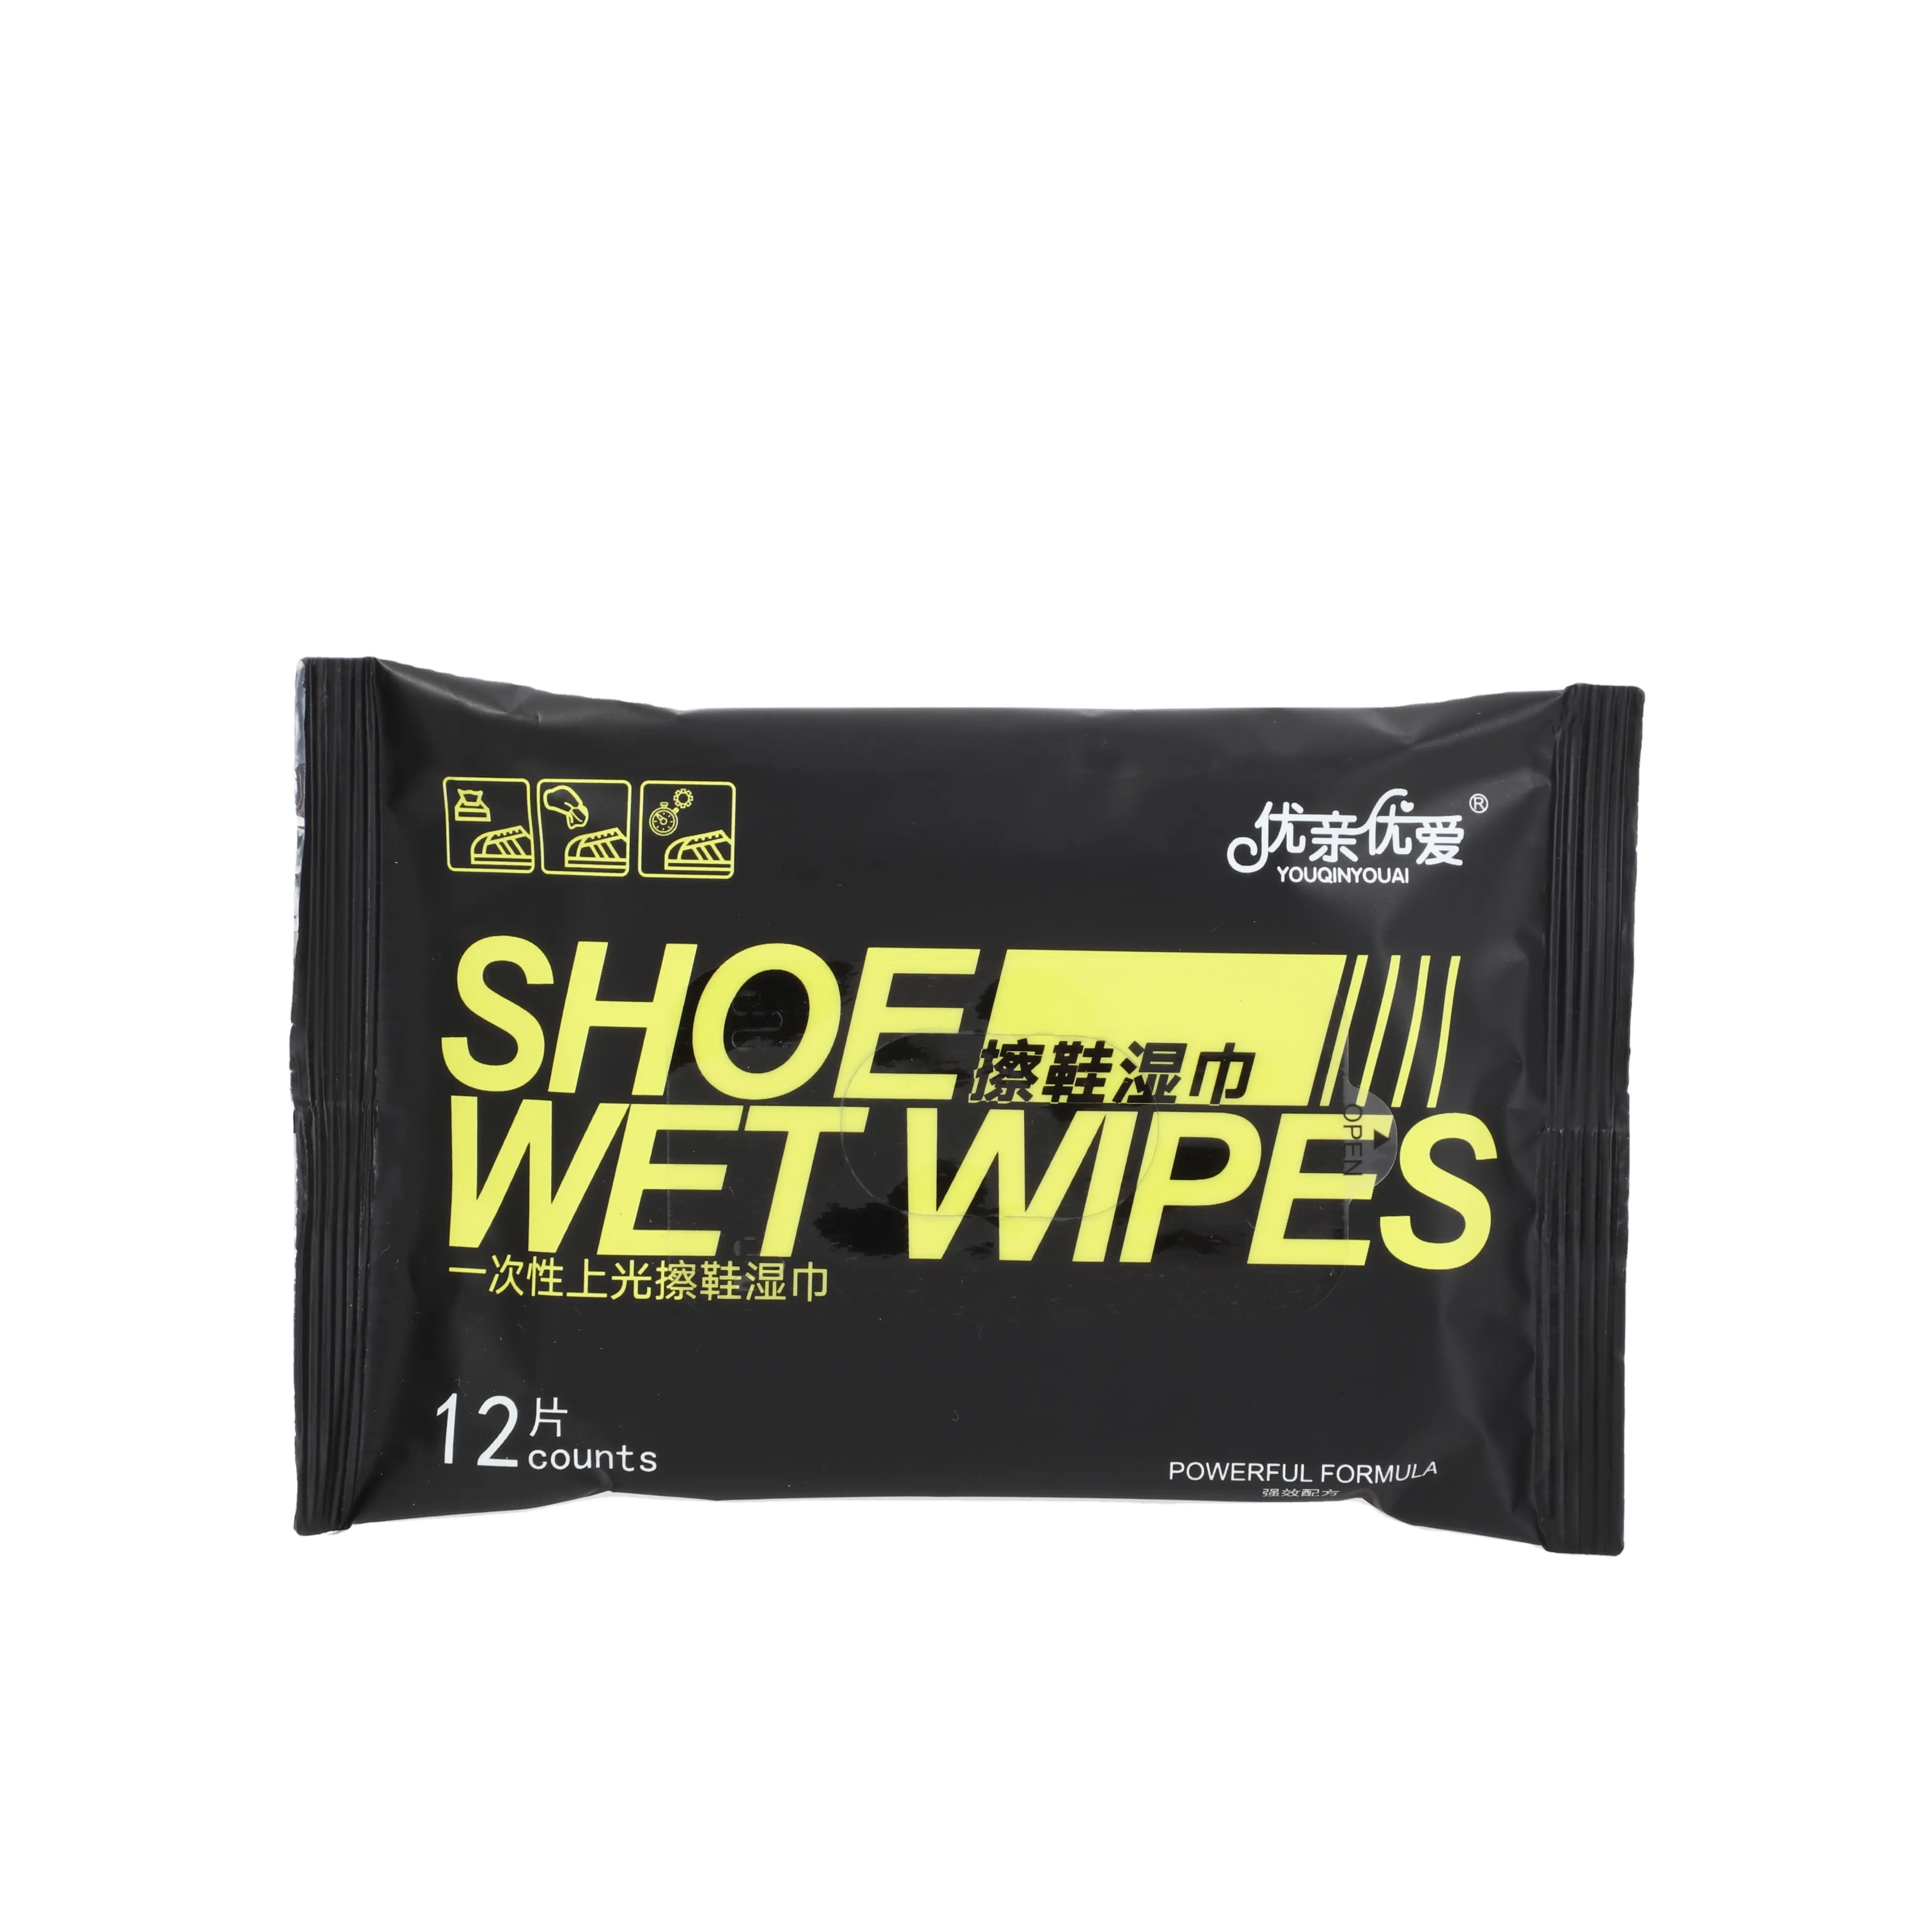 Basketball Shoes jordan adidas Yeezy Private Label Custom Cleaning Sneaker Shoe cleaner Wet Wipes